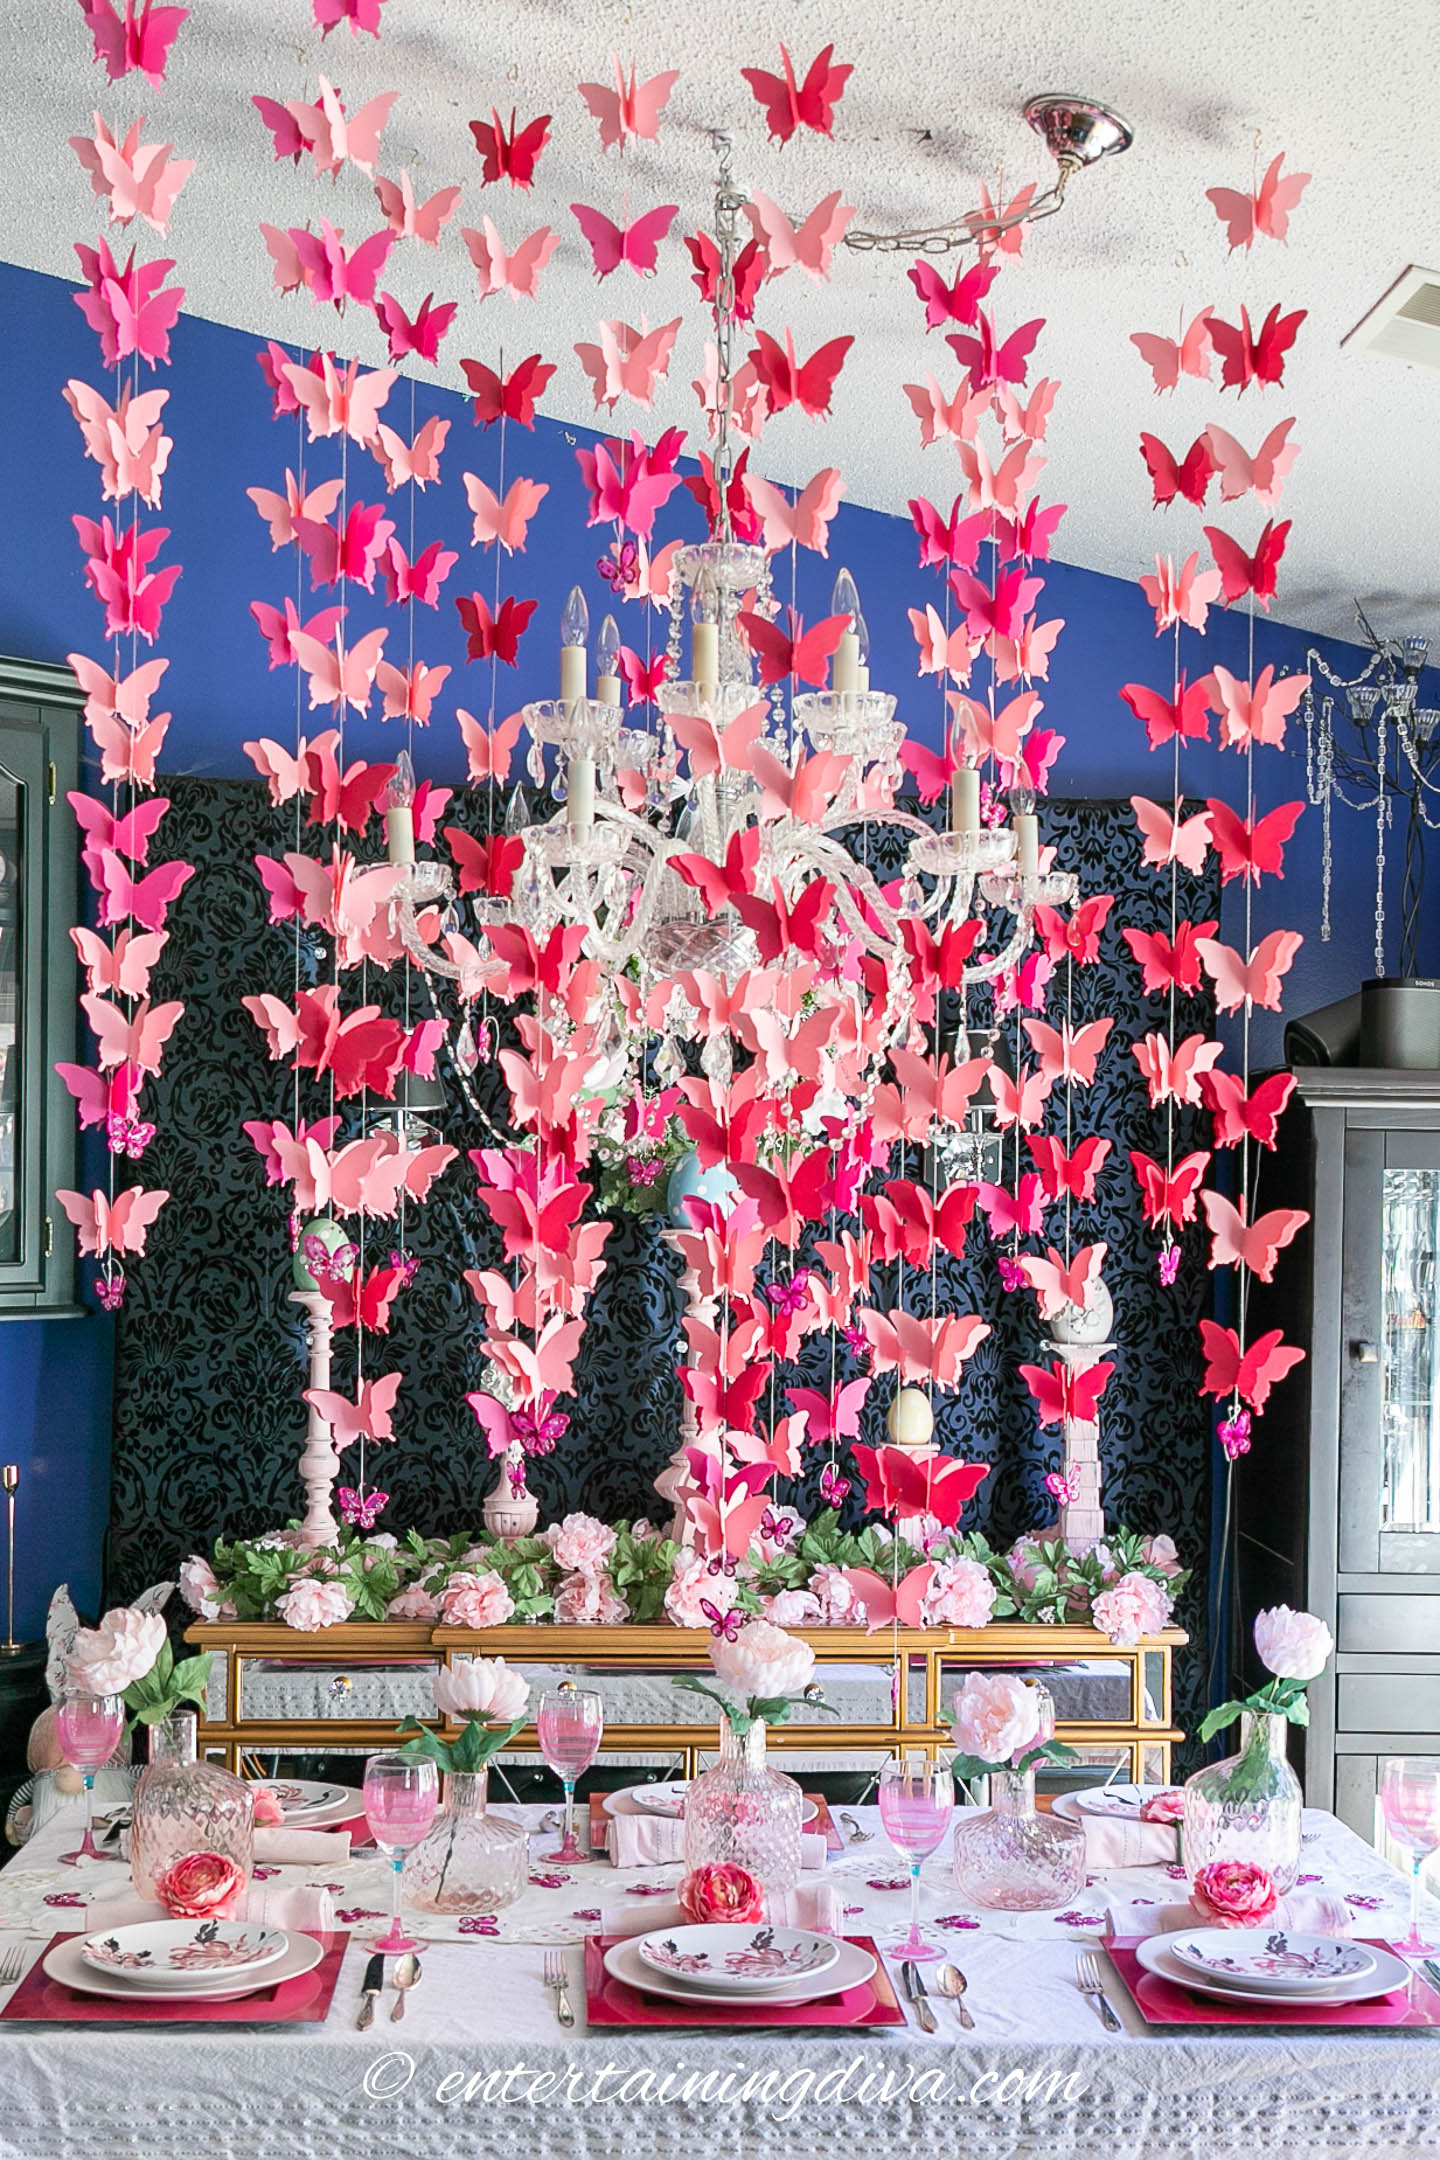 pink butterflies centerpiece hanging from the ceiling above the table